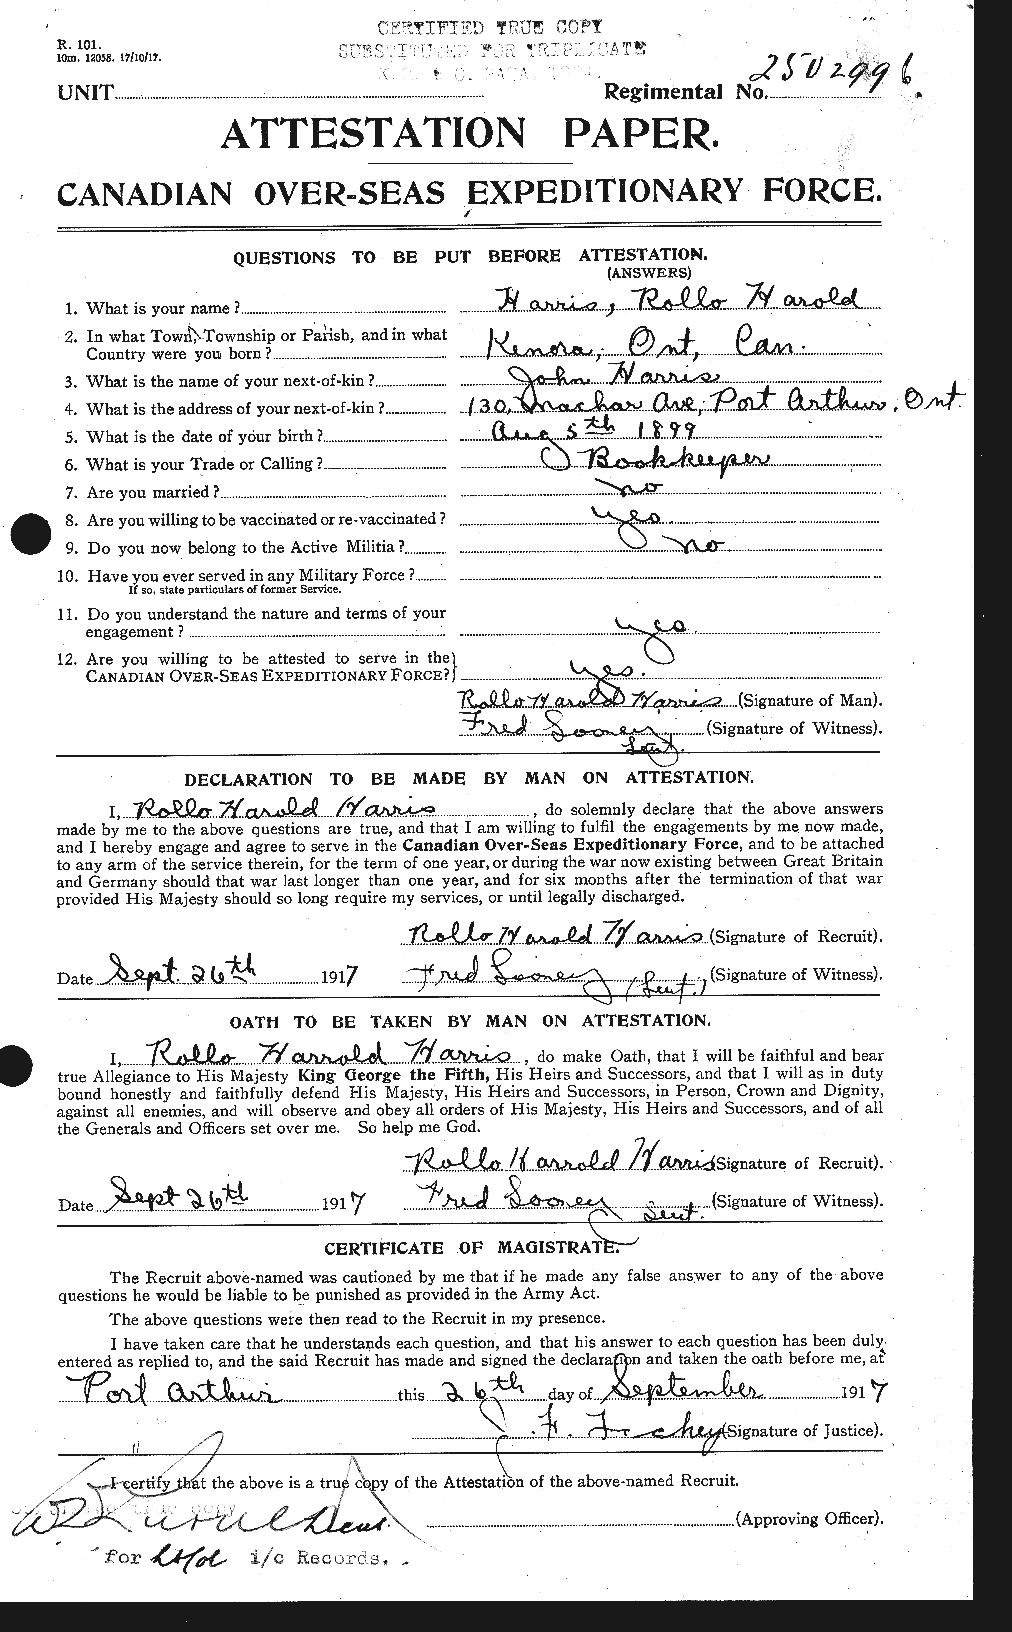 Personnel Records of the First World War - CEF 378172a